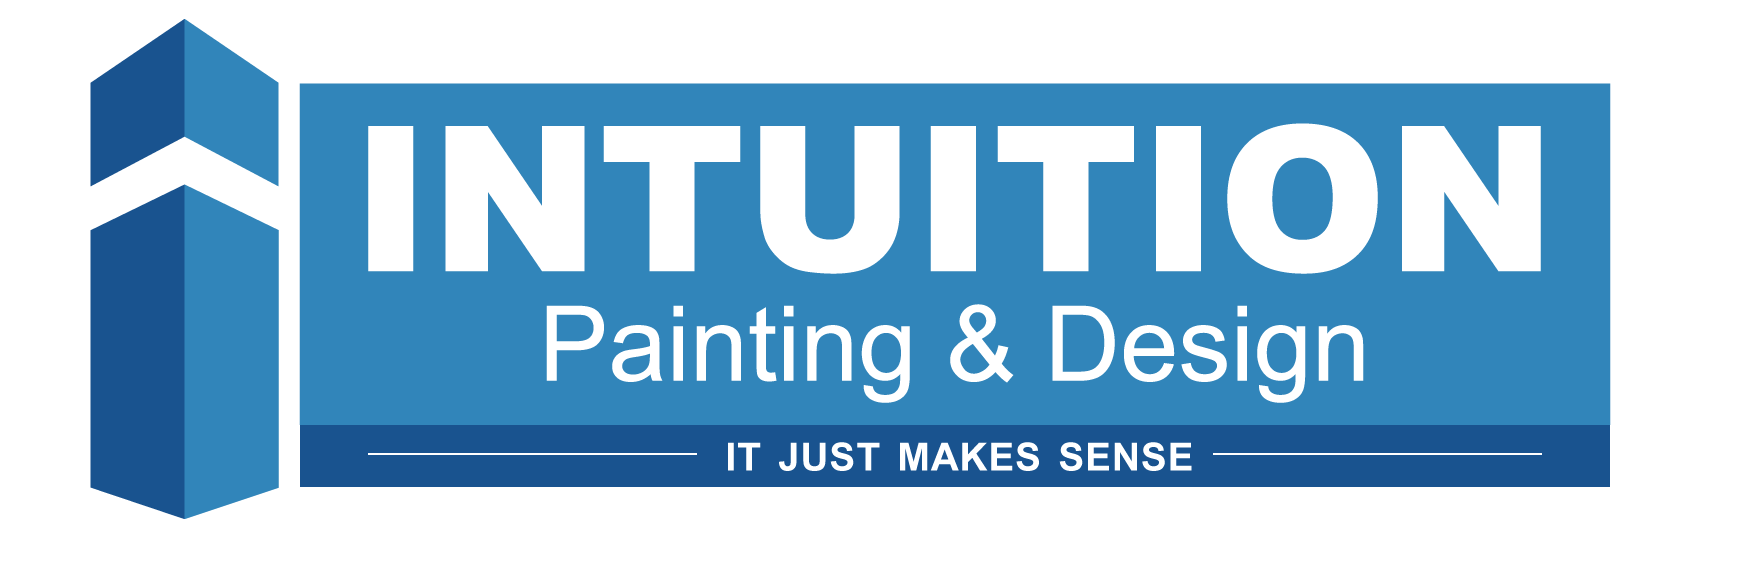 InTuition Painting & Design